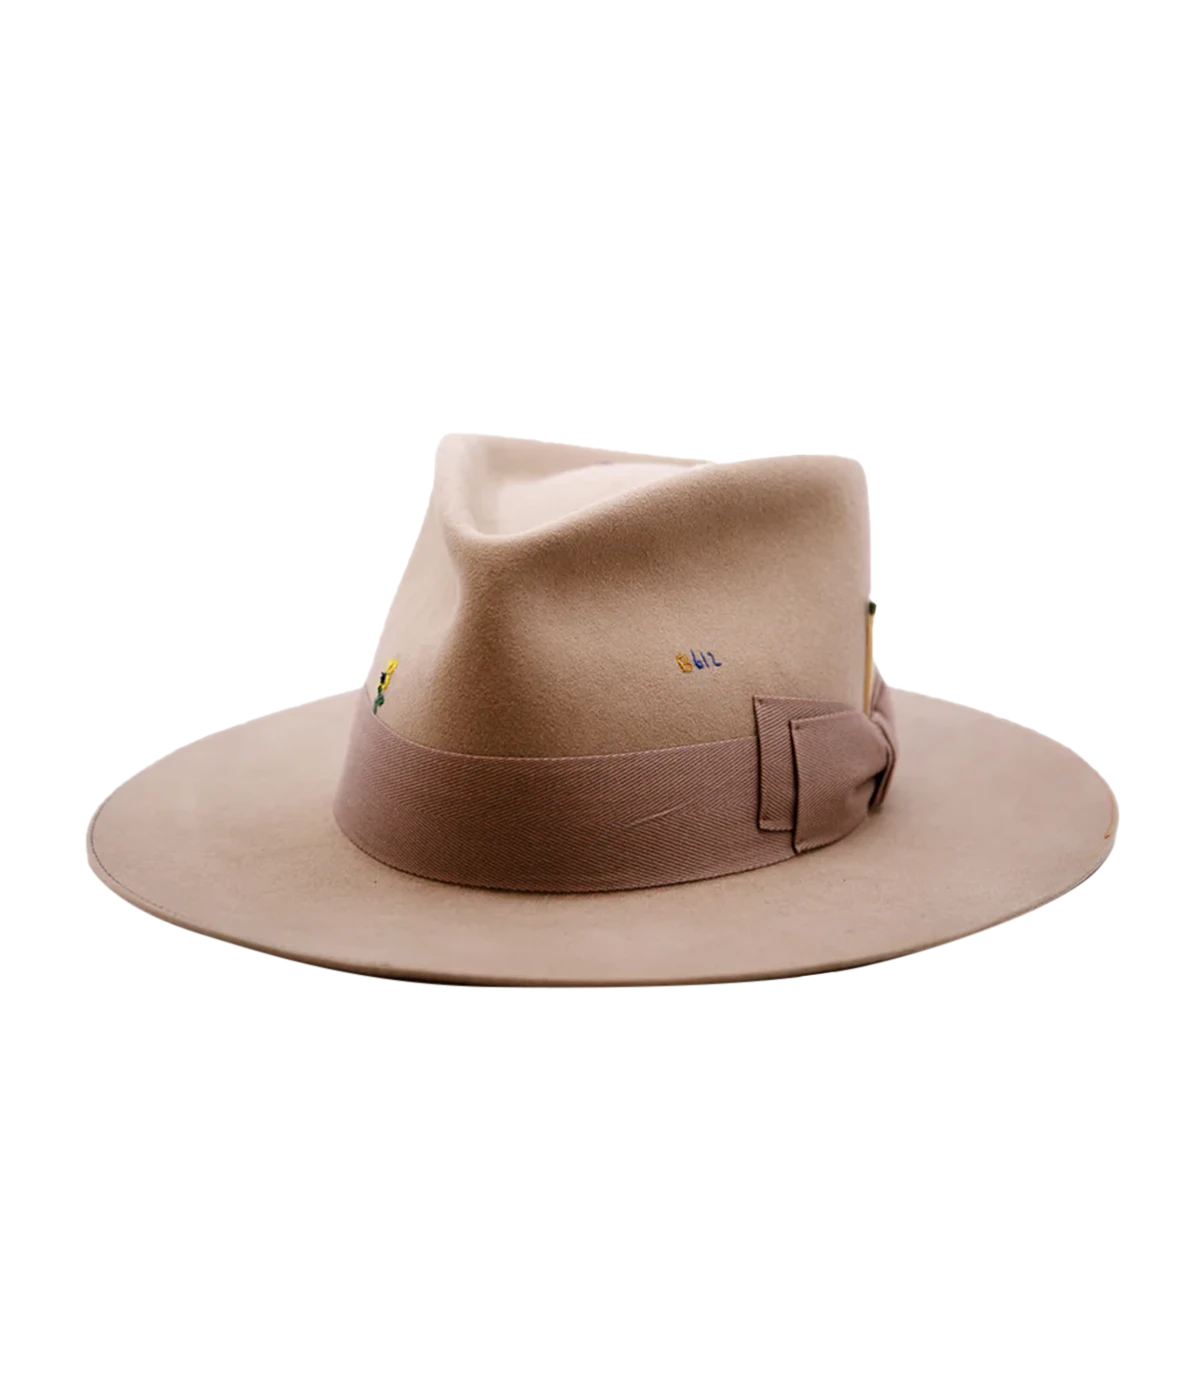 A stand out investment piece hand made in USA, a stylist wide brim felt hat, with 100% natural felt, raw hem and signature match stick. Throw on and go, summer hat, trendy, special, camel colourway, rainbow embroidery.